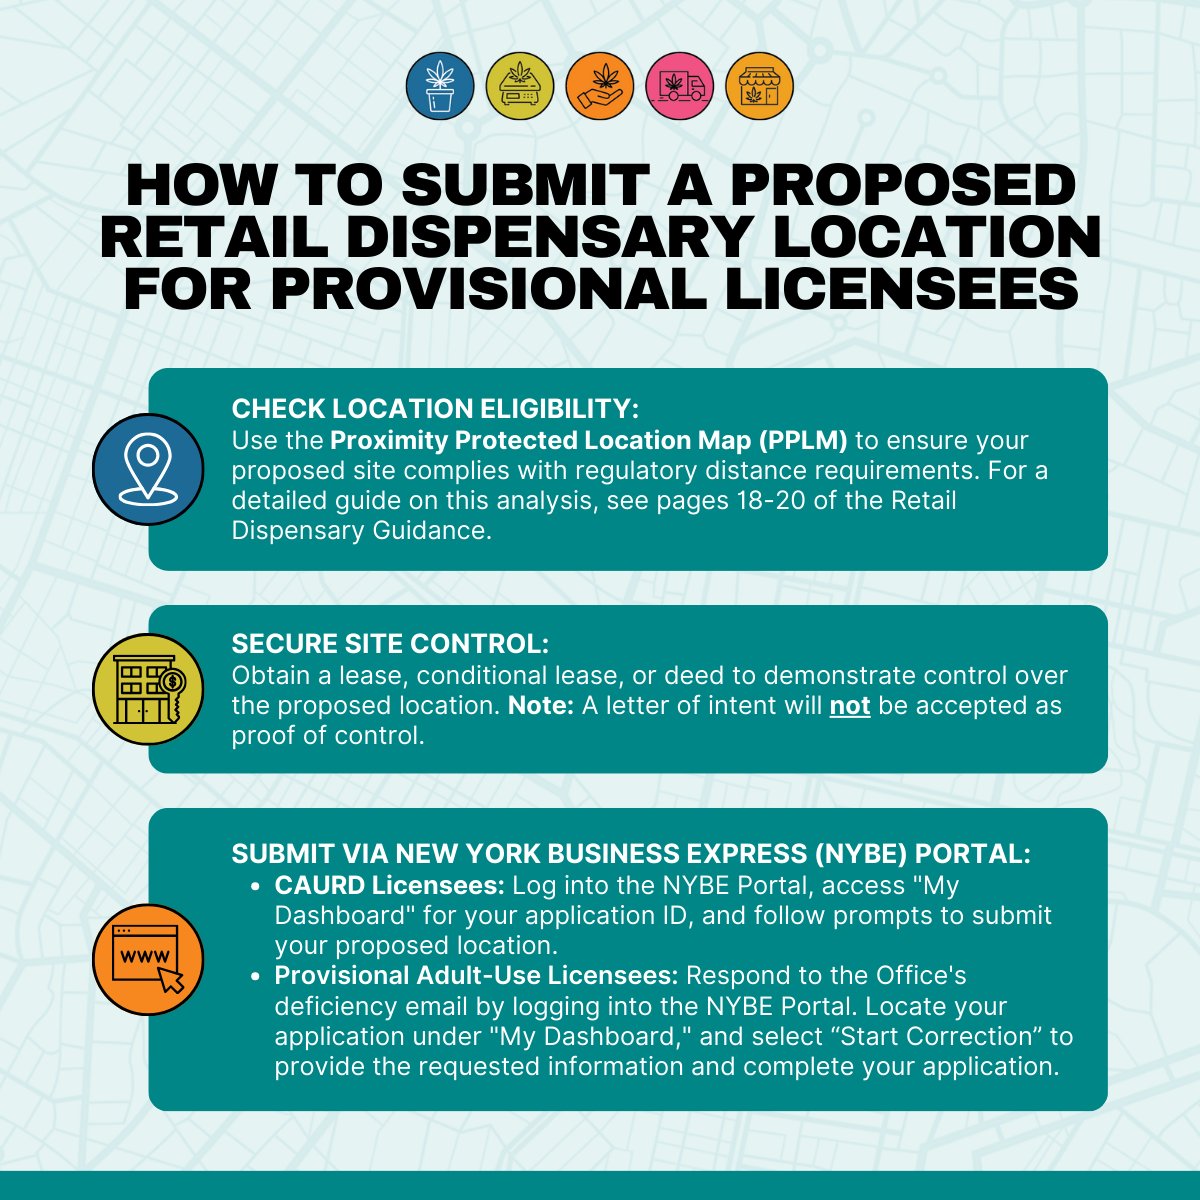 OCM released the Proximity Protected Location Map (PPLM), showing licensed cannabis dispensaries & proposed locations on pending applications. Here’s how to submit a proposed retail dispensary location for provisional licensees. For more guidance, visit: cannabis.ny.gov/proximity-prot…